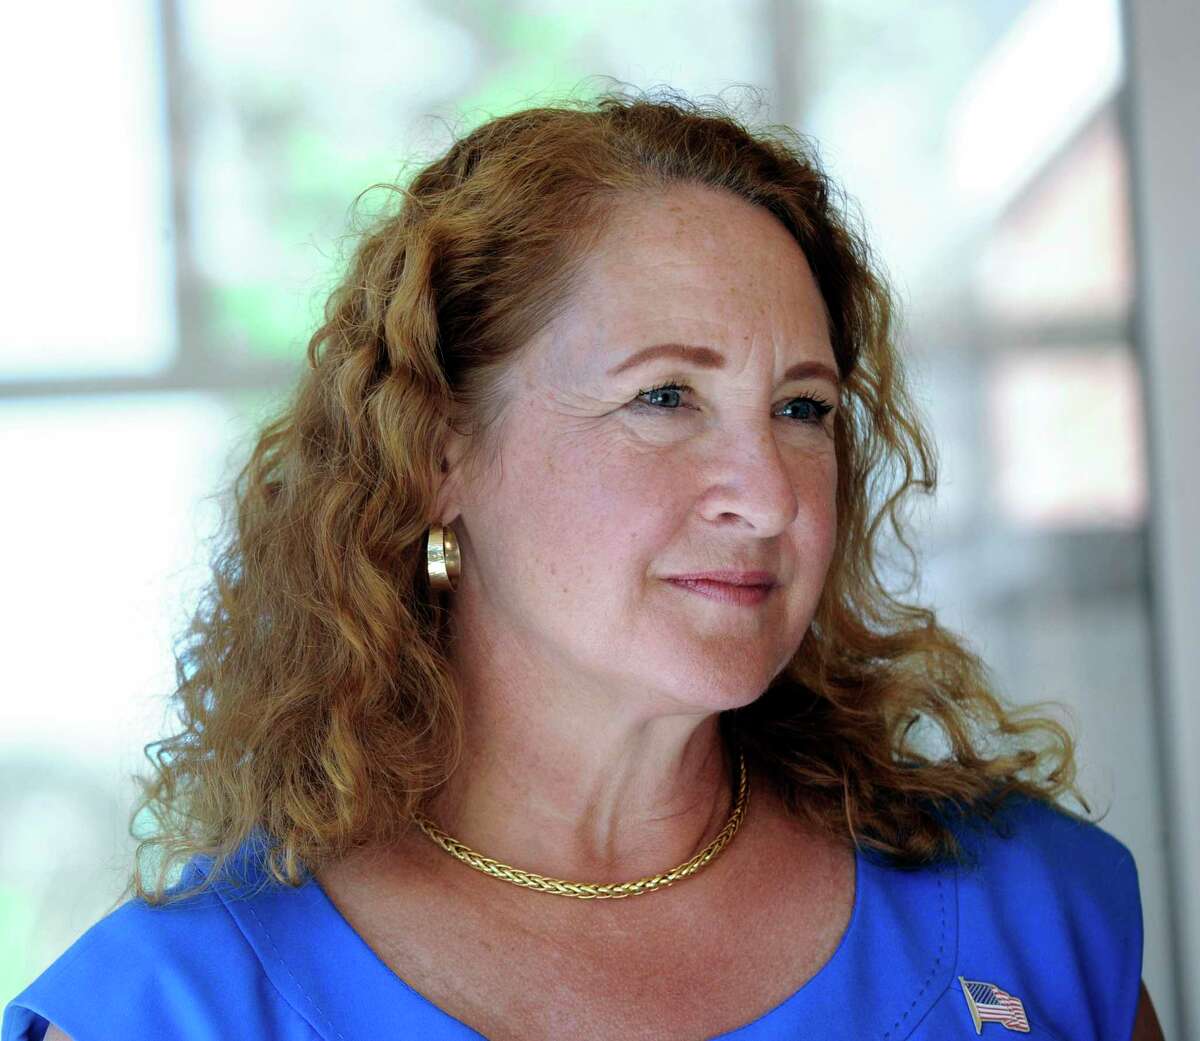 Then-U.S. Rep. Elizabeth Esty visits with seniors at the Brookfield Senior Center, Monday, July 9, 2018.